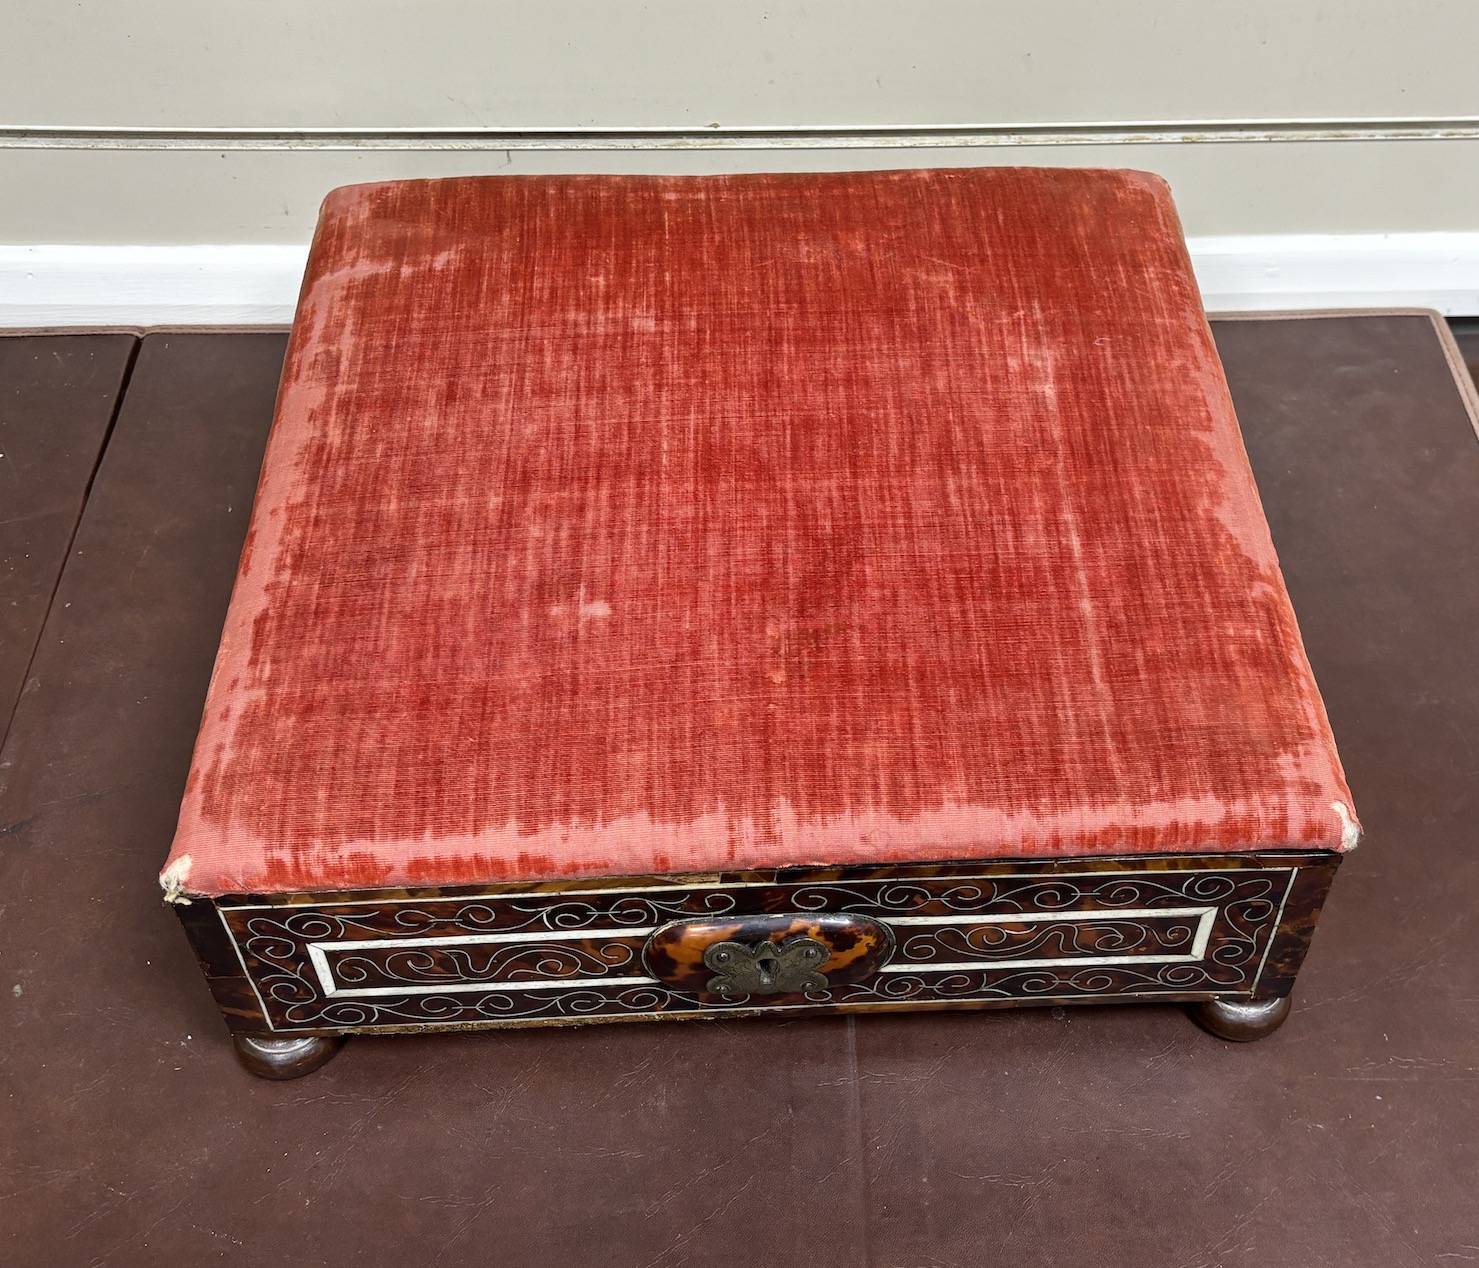 An 18th / early 19th century Portuguese tortoiseshell box with bone inlay and silk velvet lining with matching padded top, on bun feet, width 39cm, depth 38cm, height 16cm